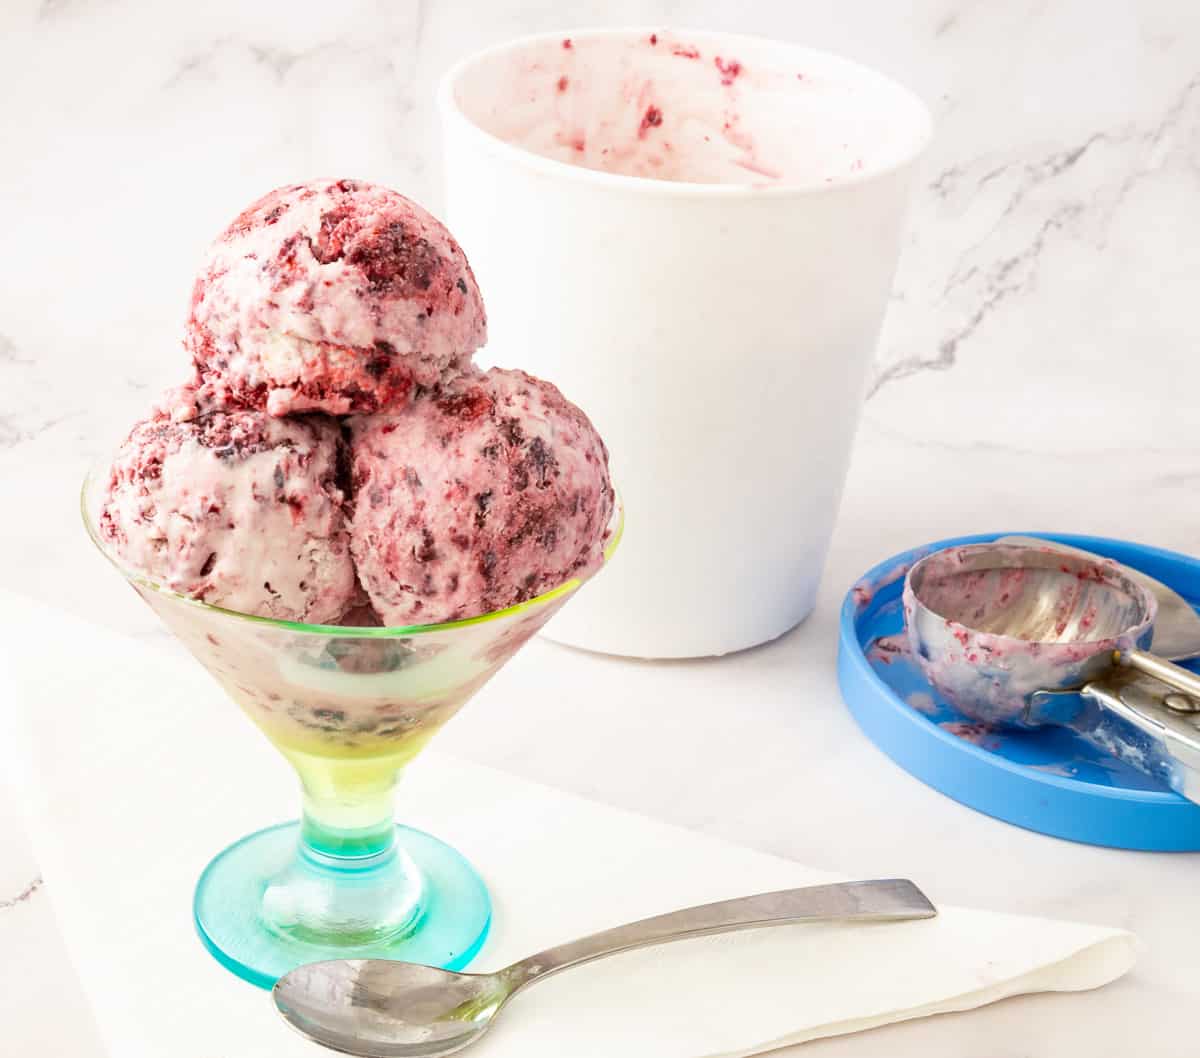 Scoops of no churn blackberry ice cream in a bowl.